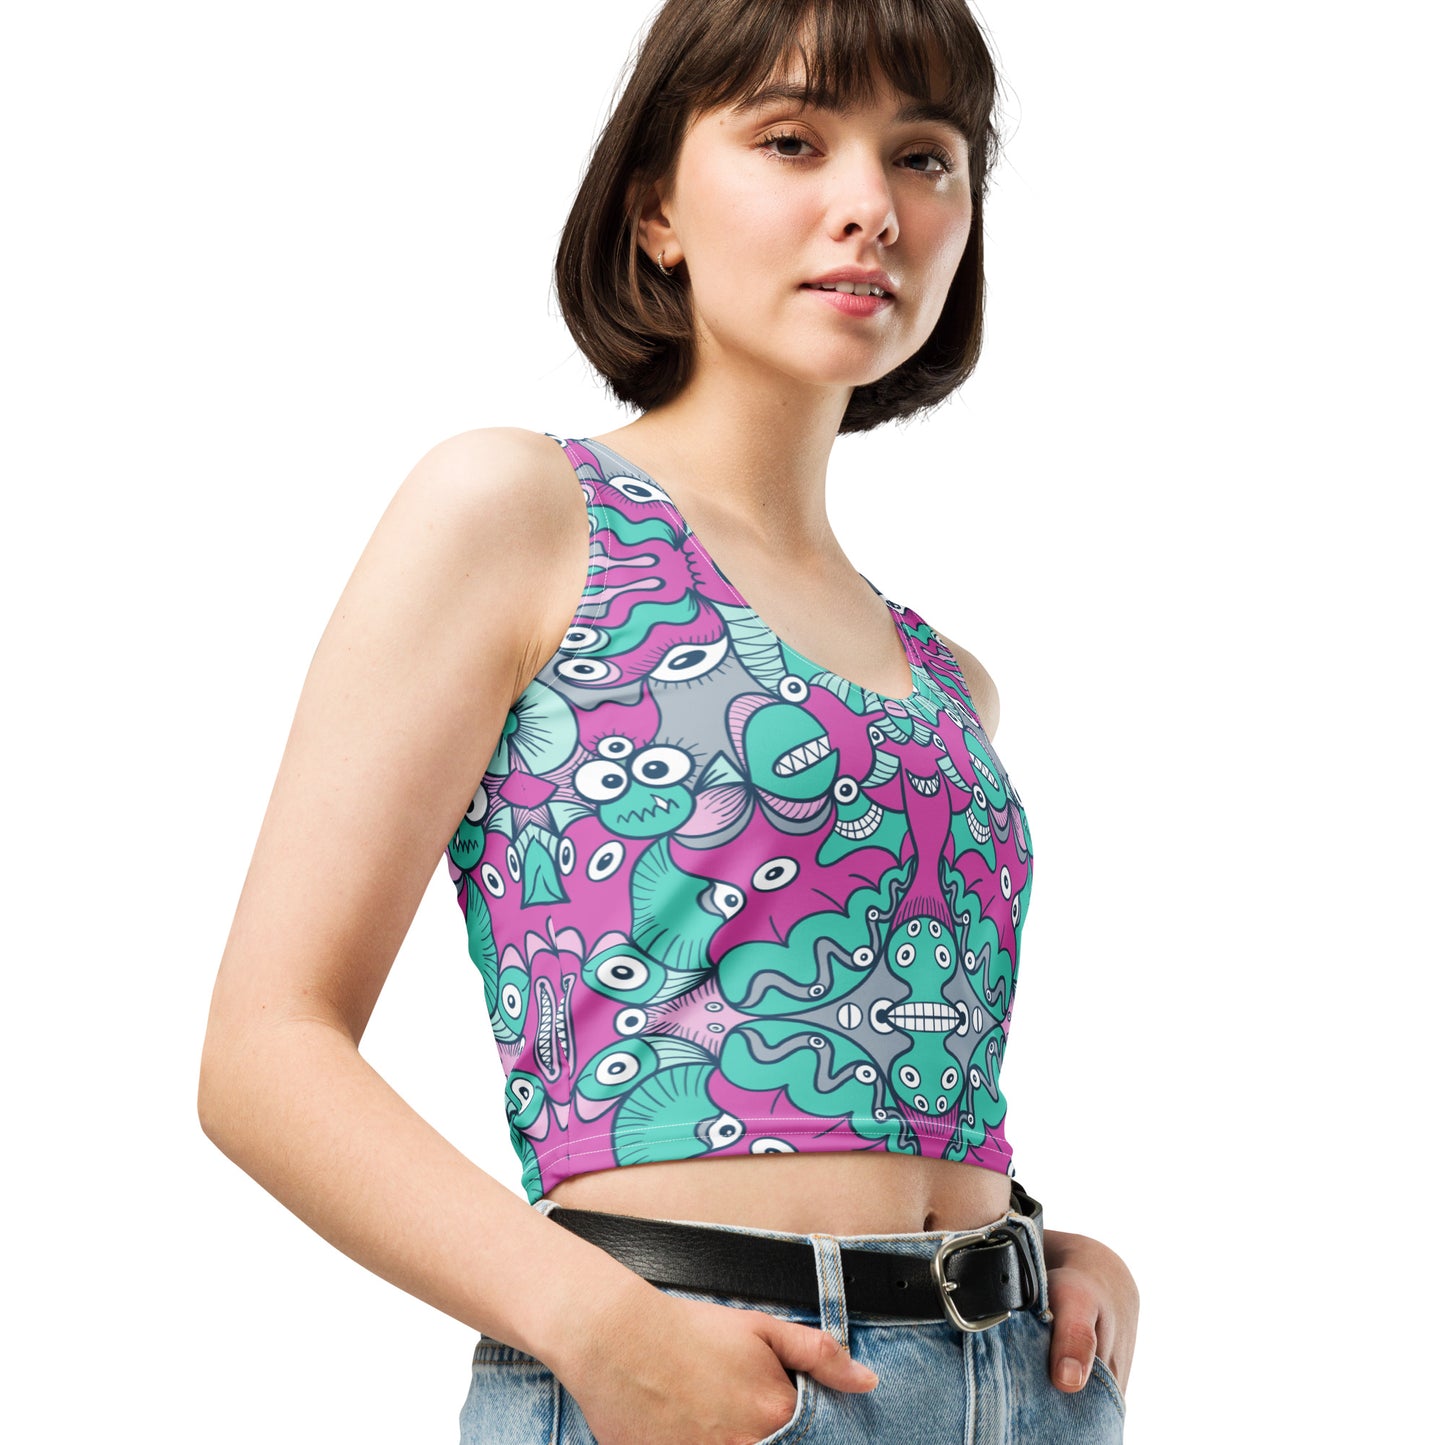 Sea creatures from an alien world Crop Top. Product detail